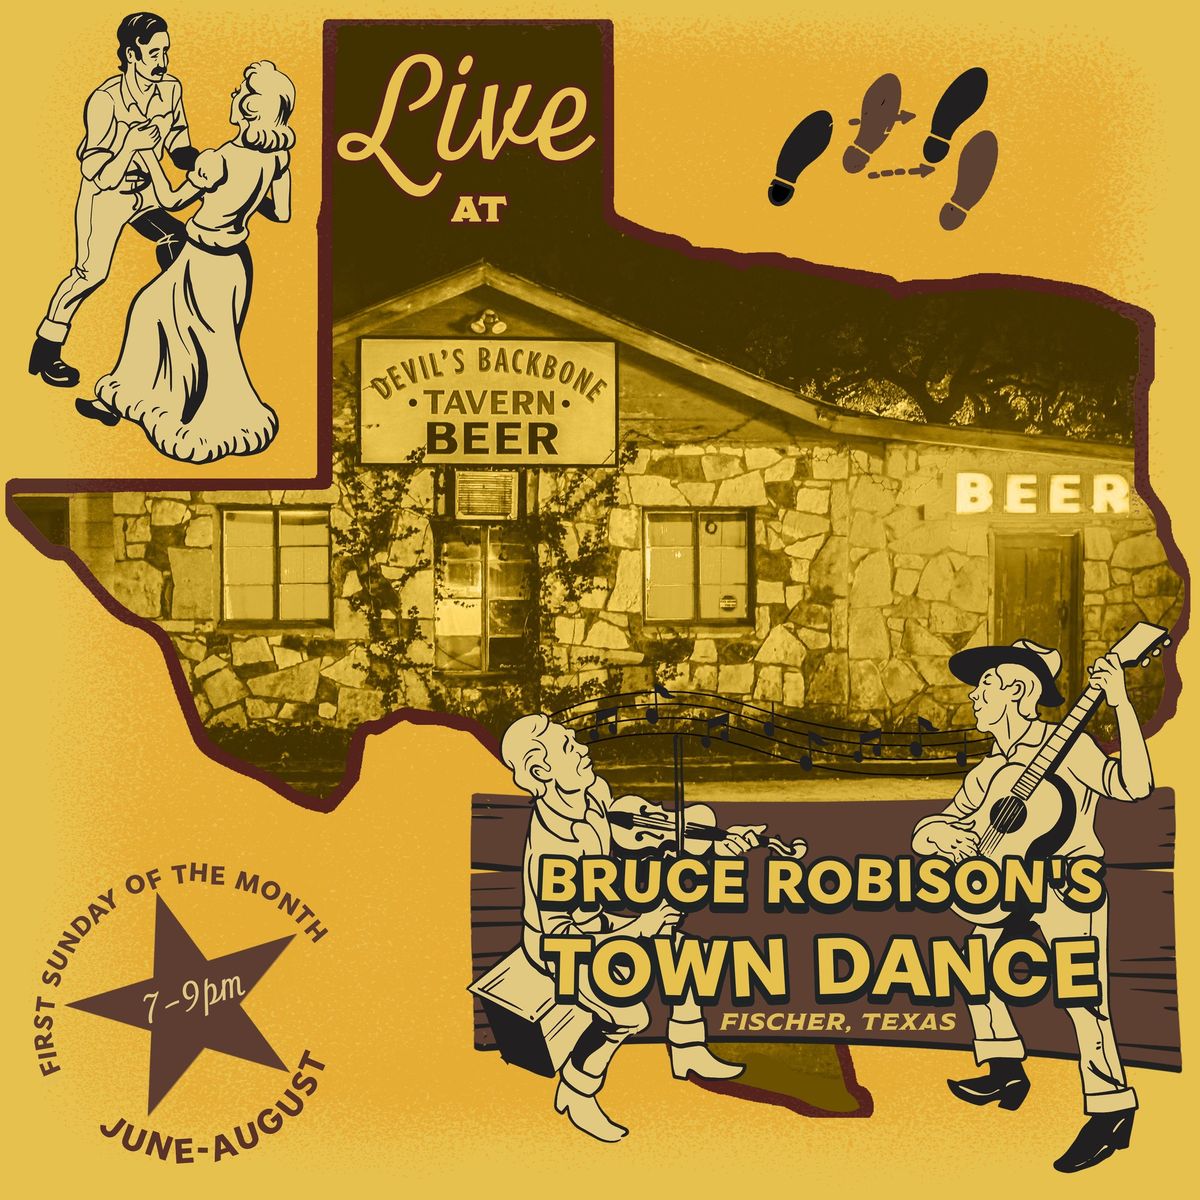 Bruce Robison's Town Dance - First Sundays June-August